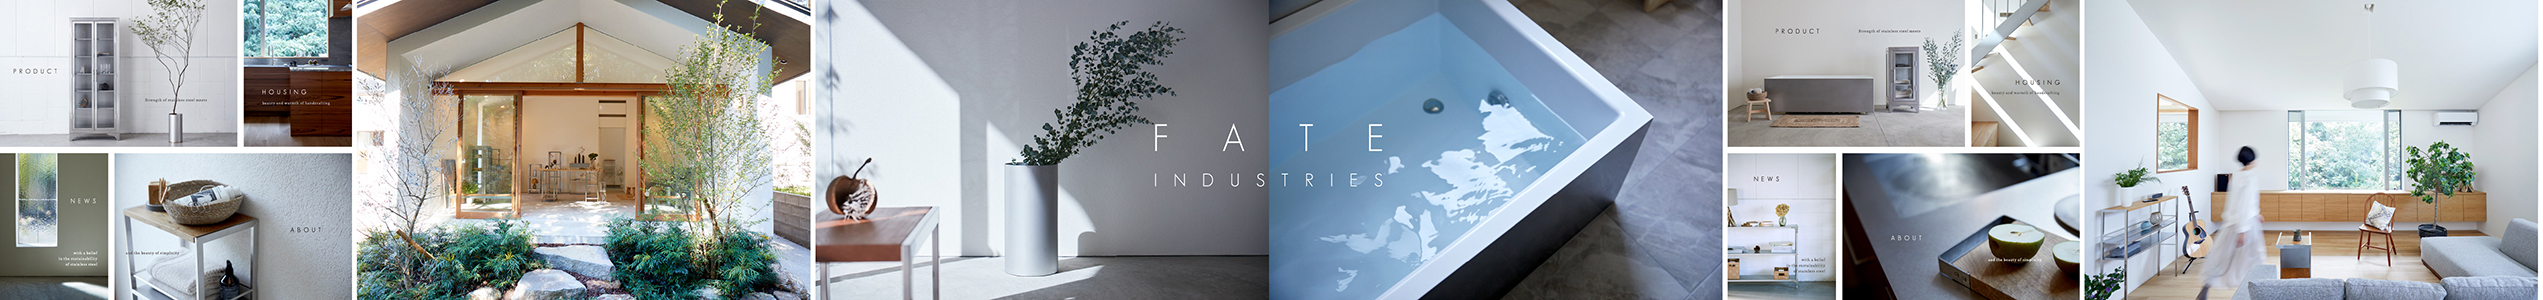 FATE INDUSTRIES